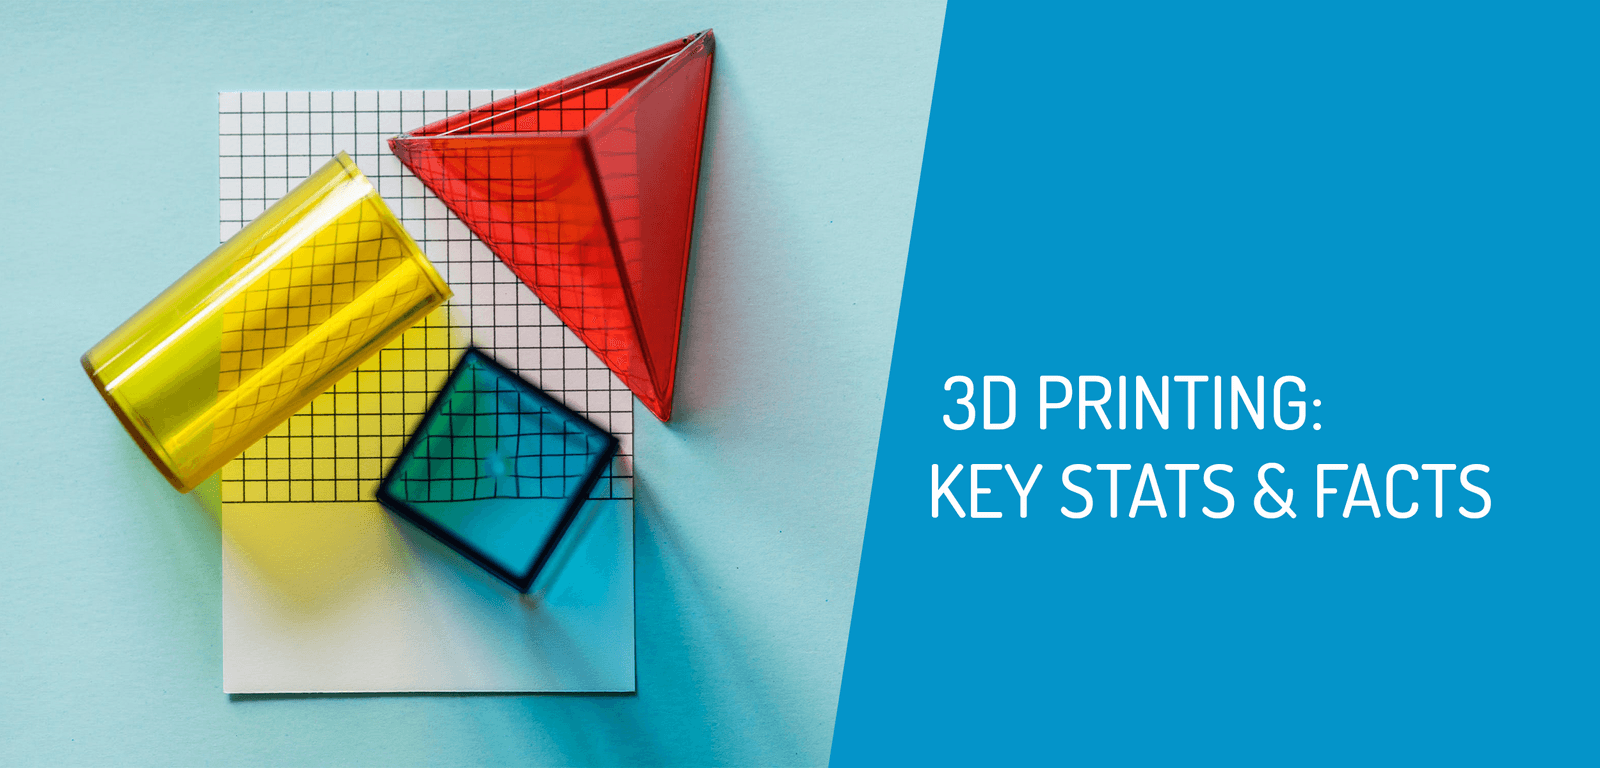 Key Stats & Facts About 3D Printing